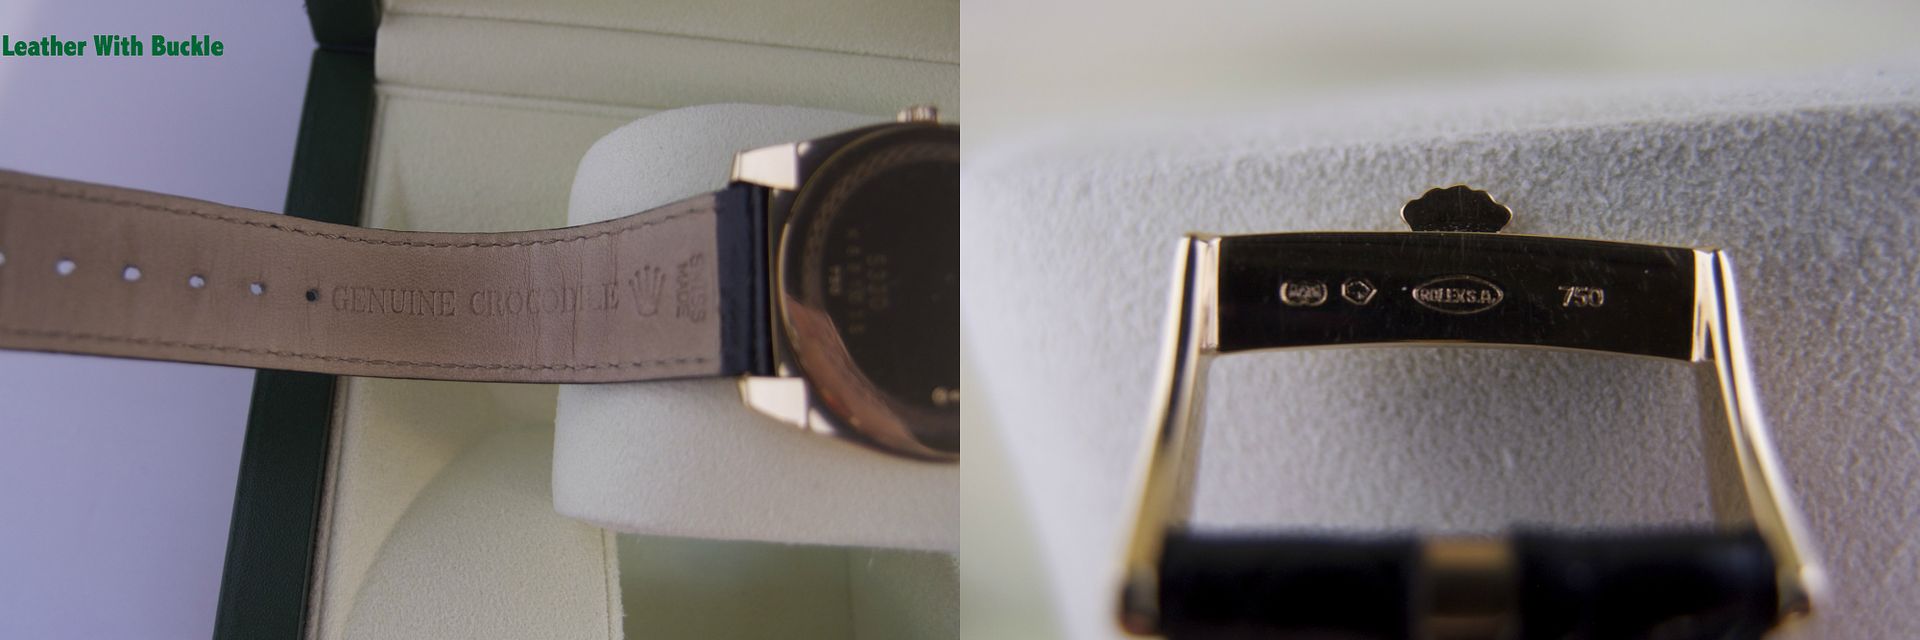  Rolex crocodile leather strap with buckle on Cellini